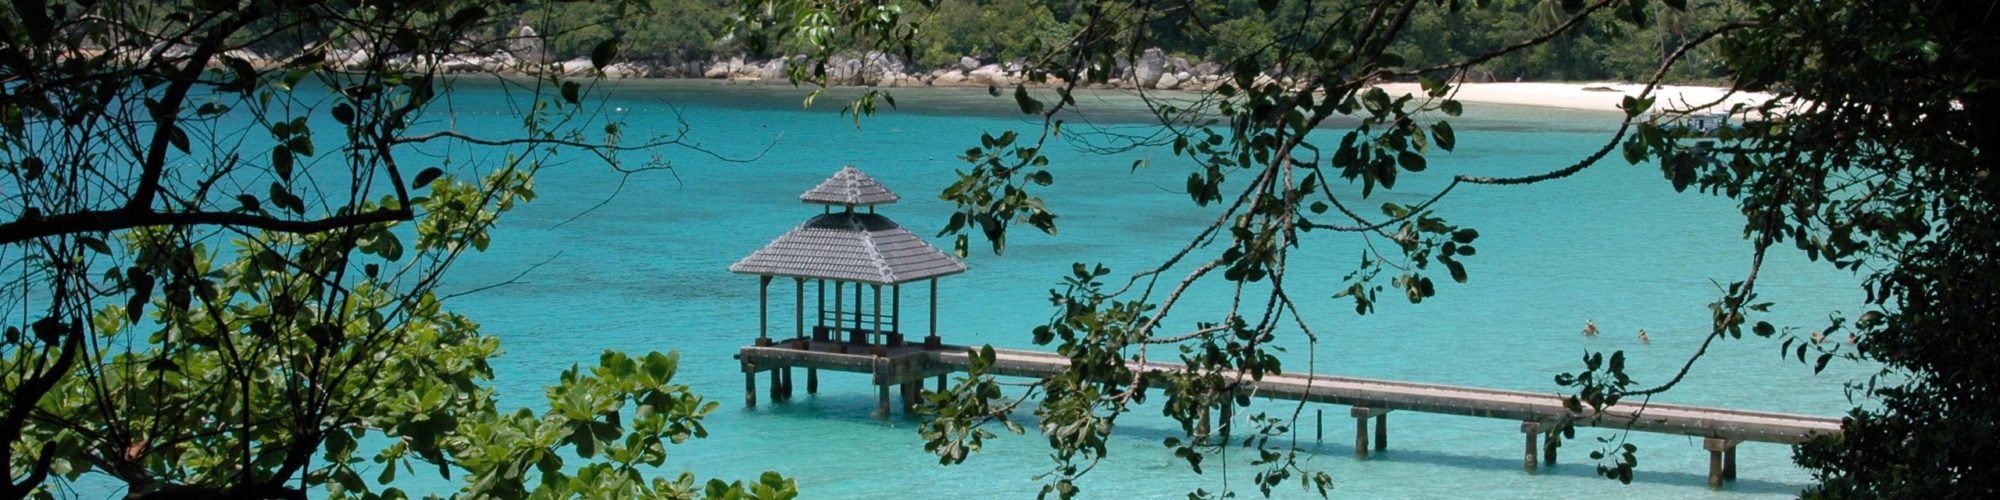 Mala Island travel agents packages deals